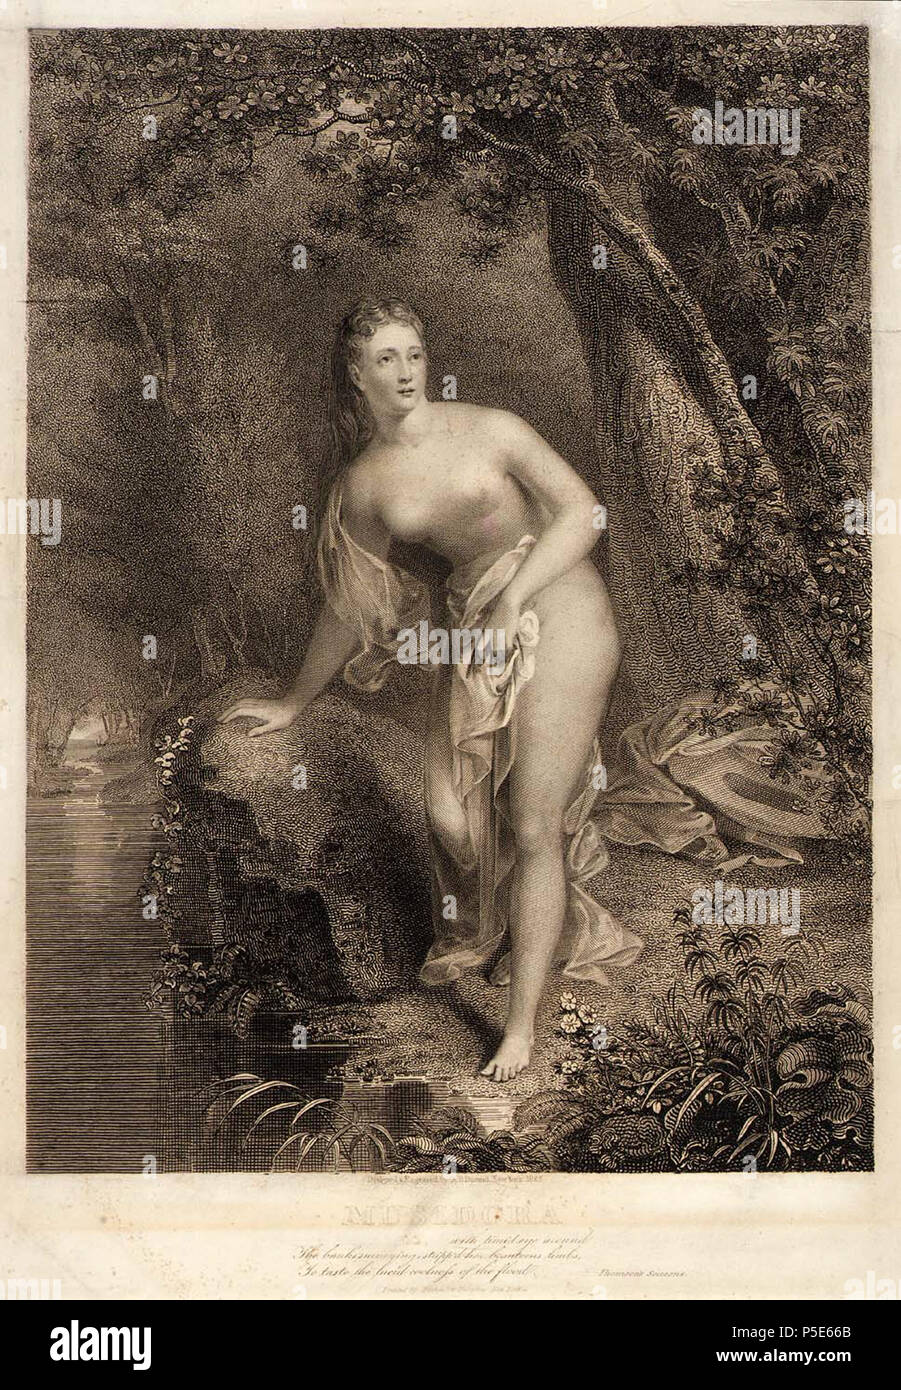 N/A. English: Musidora, engraving 14 1/2 x 10 3/4 in. (36.8 x 27.1 cm) . 1825.   Asher Brown Durand  (1796–1886)     Alternative names Asher B. Durand; Durand; A. B. Durand; Asher Brown] [Durand  Description American painter and printmaker  Date of birth/death 21 August 1796 17 September 1886  Location of birth/death Maplewood Maplewood  Work location New York  Authority control  : Q391608 VIAF:56884646 ISNI:0000 0000 8136 2847 ULAN:500026080 LCCN:n50032524 NLA:35050786 WorldCat 142 AsherDurand-Musidora Stock Photo